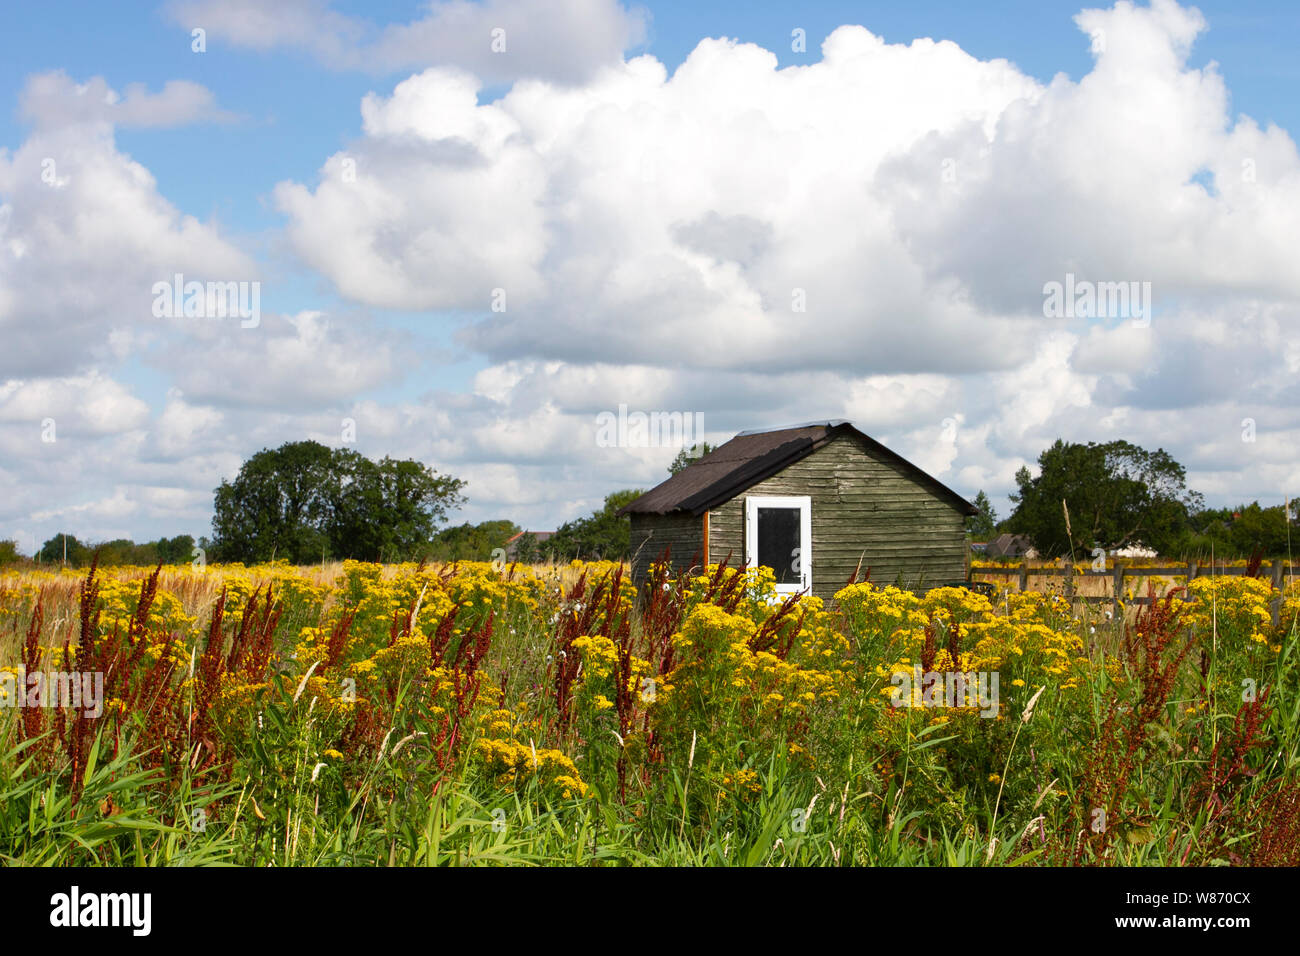 Tarleton, Lancashire. 8th August, 2019. UK Weather: Blue skies and bright sunshine on wild flower plants in a fallow field in the agricultural area.The yellow daisy-like flowers are common yellow ragwort a plant that is toxic to livestock and horses and occurs in neglected or overgrazed grass fields.  It is the only one of the five weeds specified in the Weeds Act 1959 that poses a serious risk to animal health, especially horses, ponies, cattle and sheep as it can cause cumulative liver damage and can even be fatal if ingested in its green or dried state. Credit: MWI/AlamyLiveNews Stock Photo